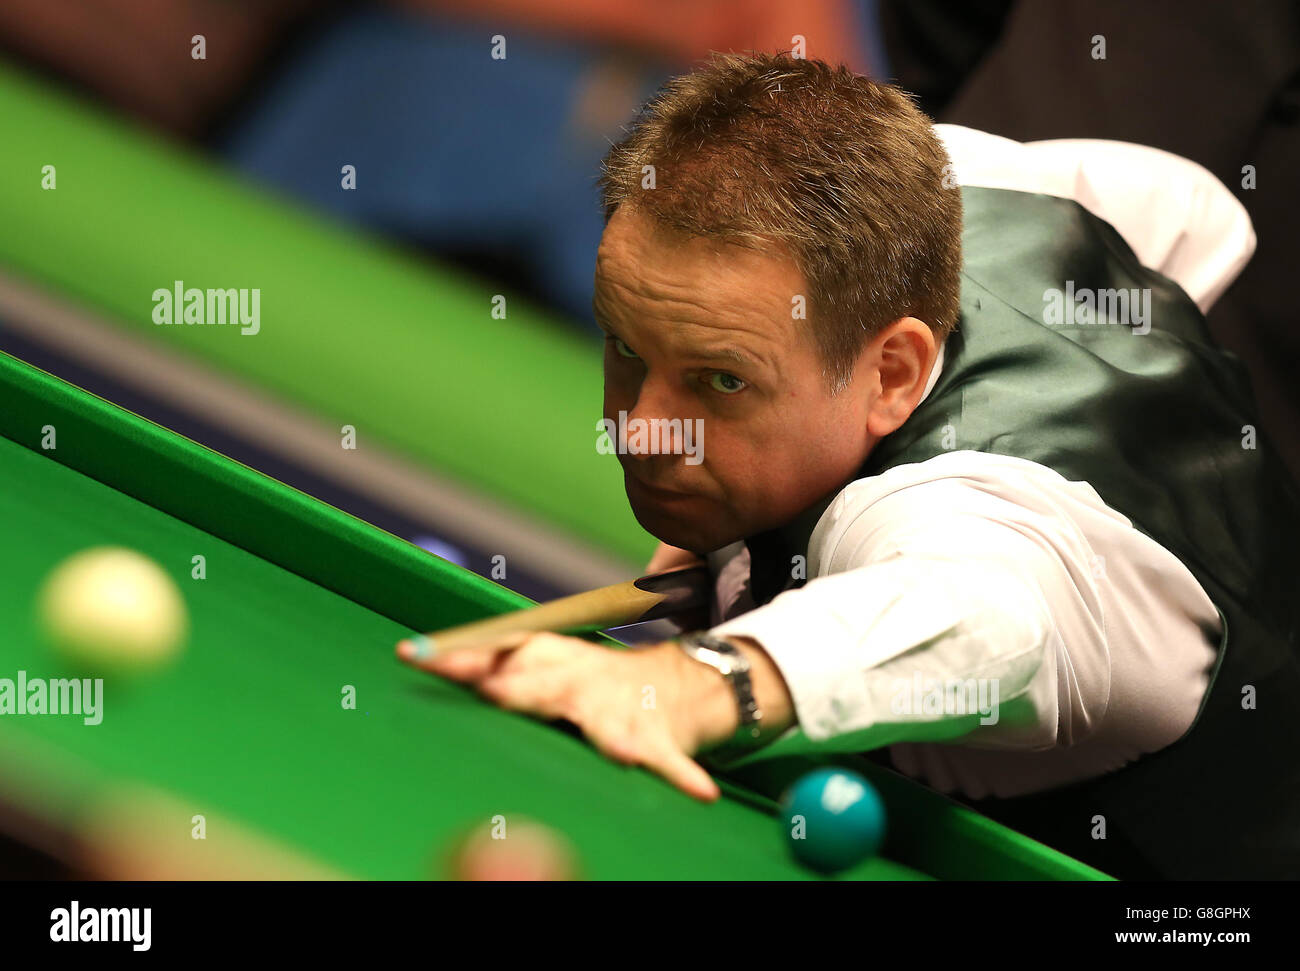 Joe Swail in action against Martin Gould during day nine of the 2015 Betway UK Snooker Championship at The York Barbican, York. Stock Photo